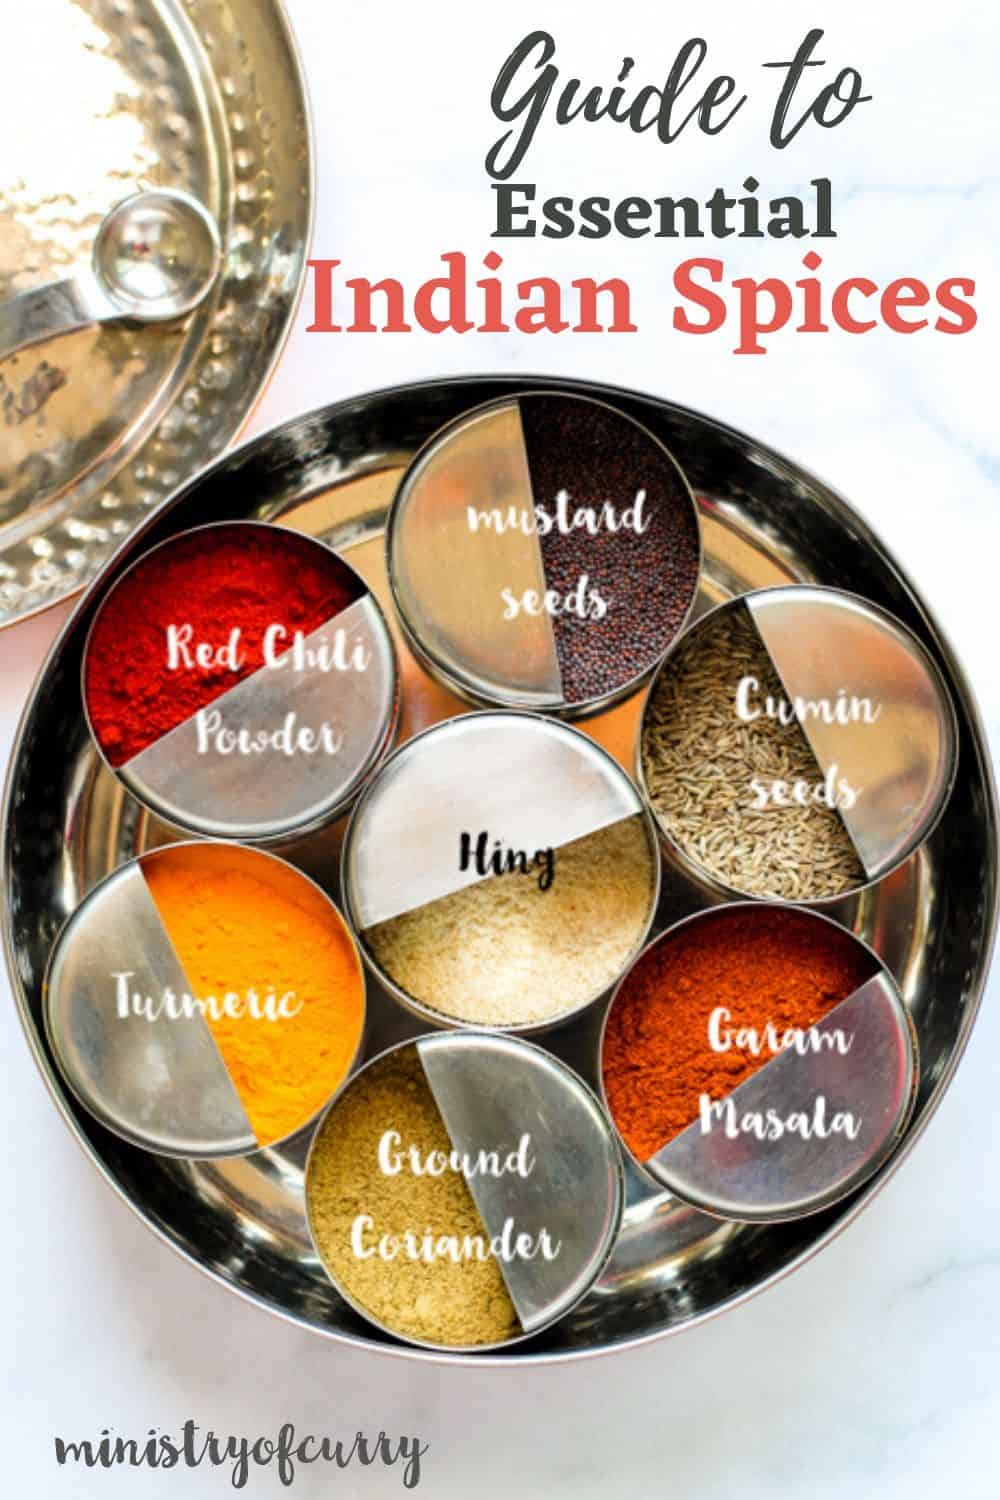 https://ministryofcurry.com/wp-content/uploads/2019/08/essential-spices.jpg